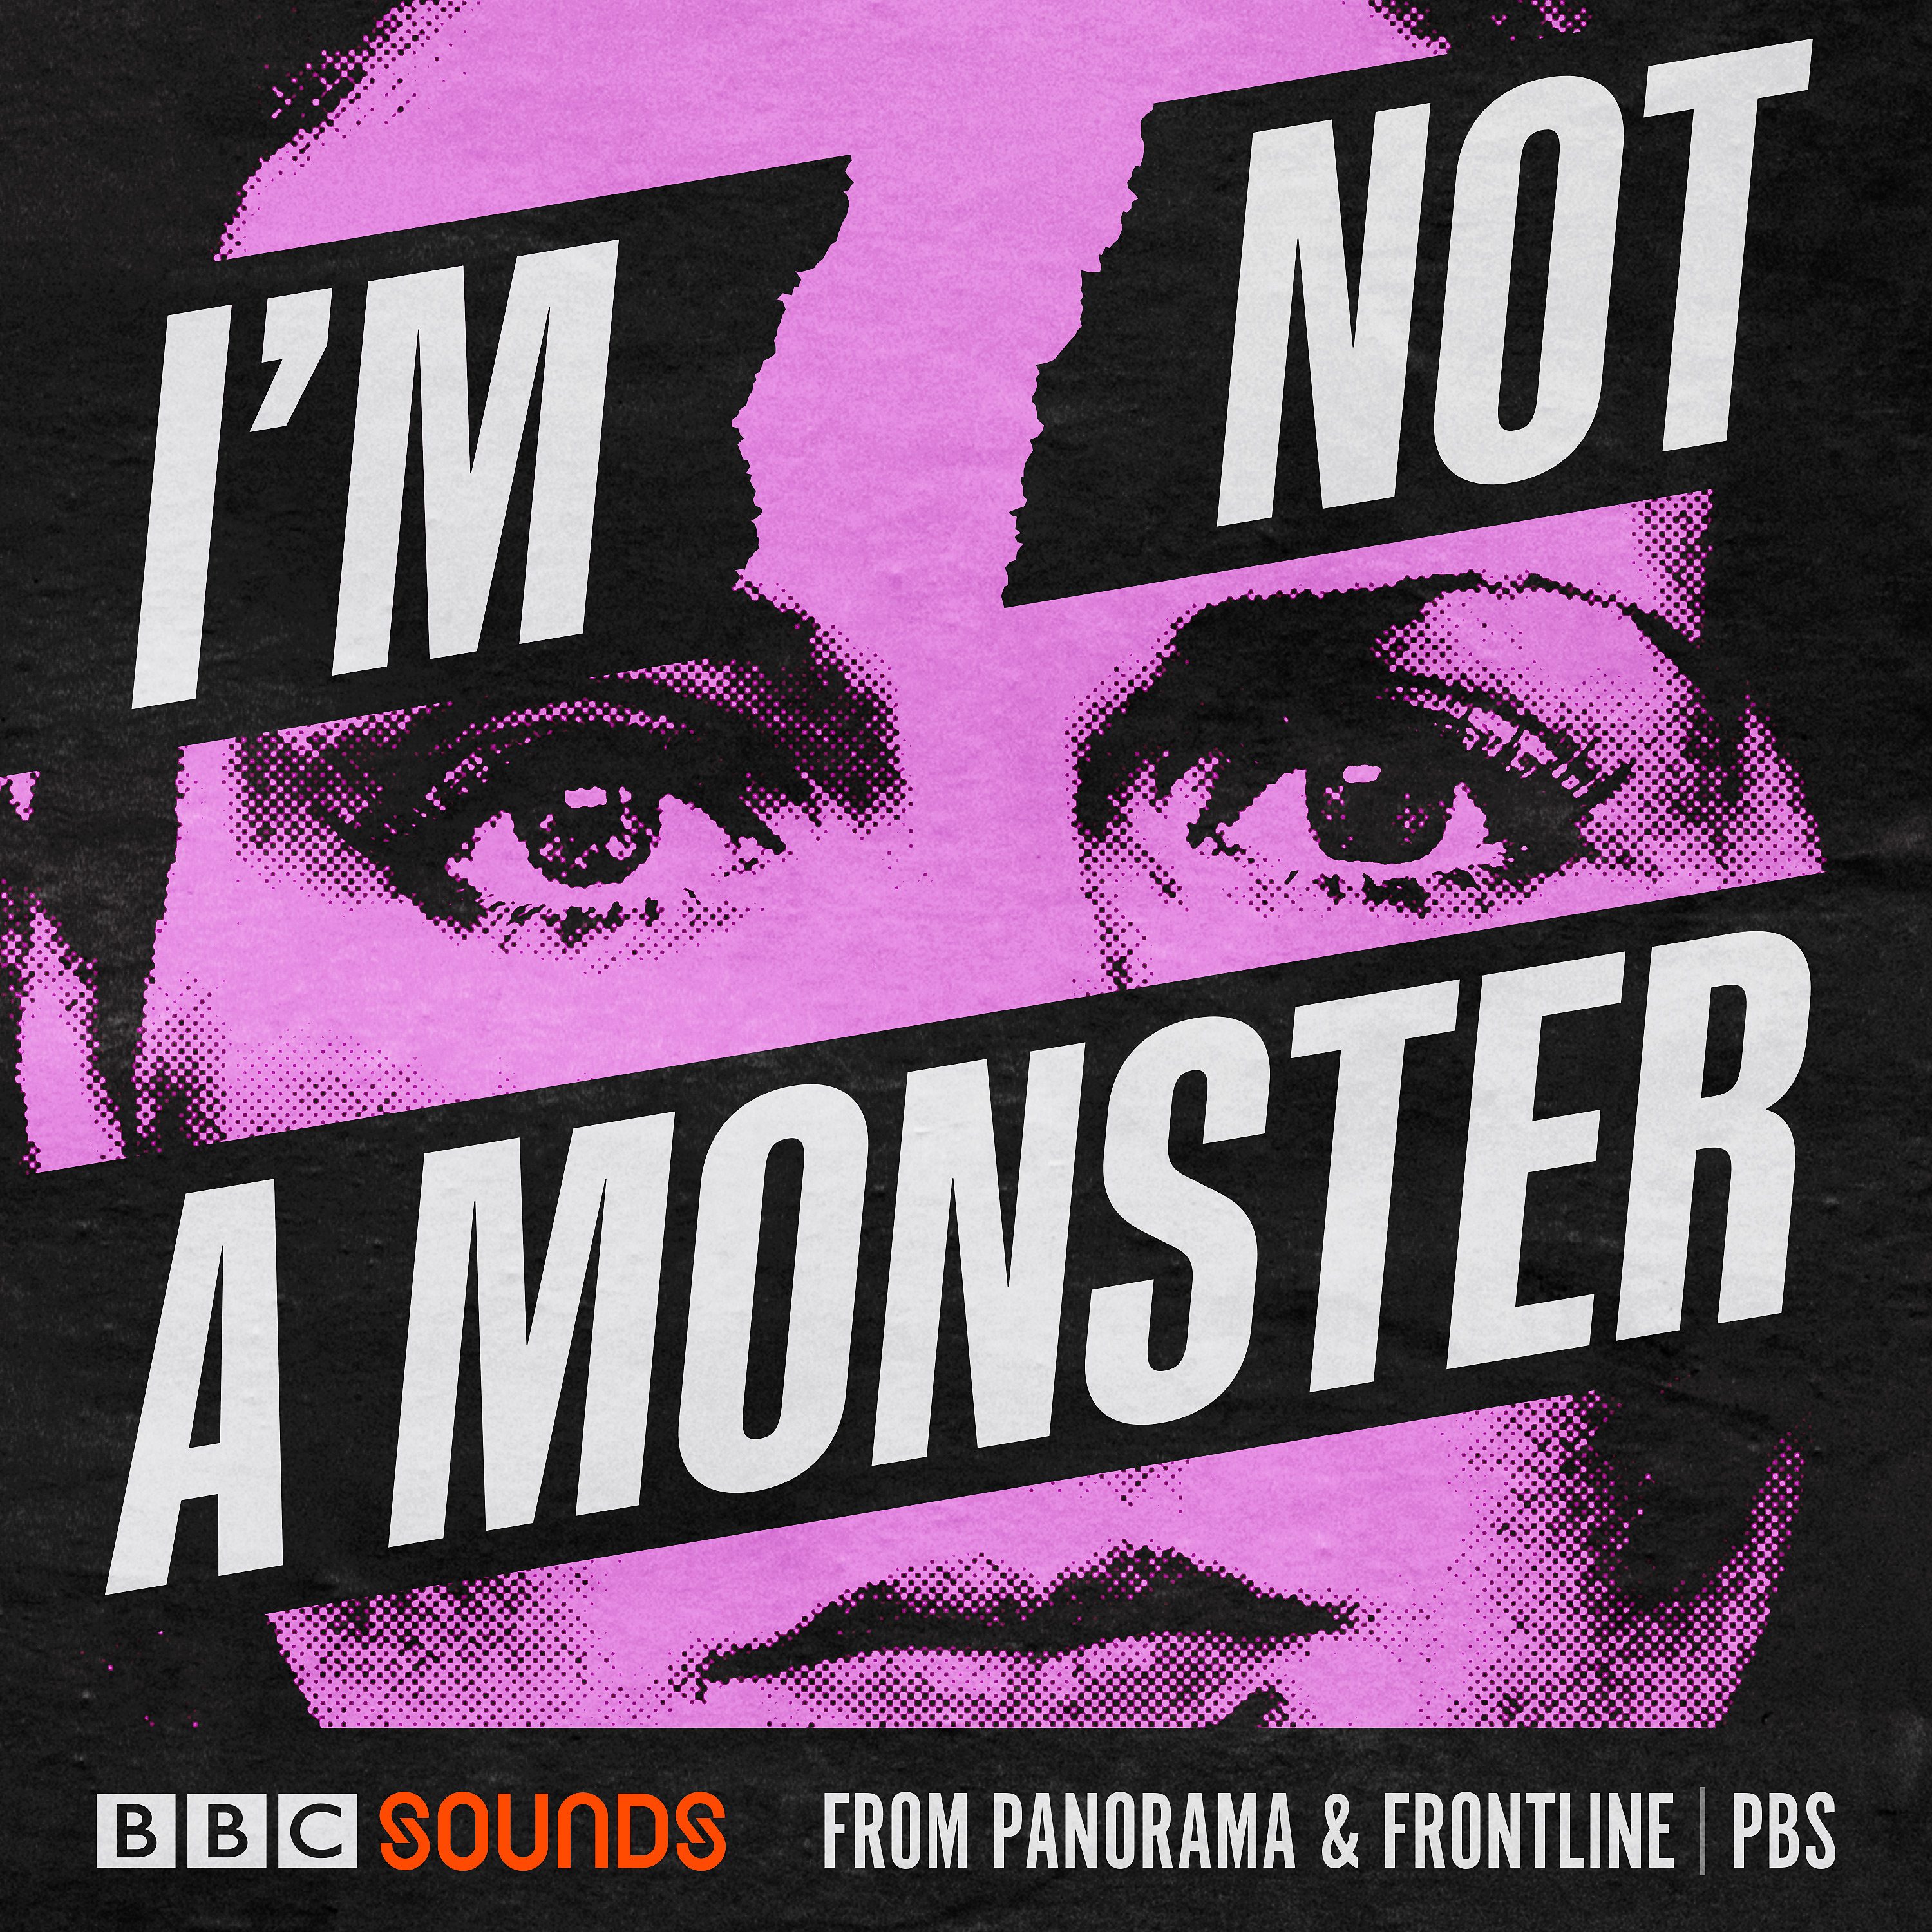 I'm Not A Monster - from BBC Panorama & FRONTLINE PBS